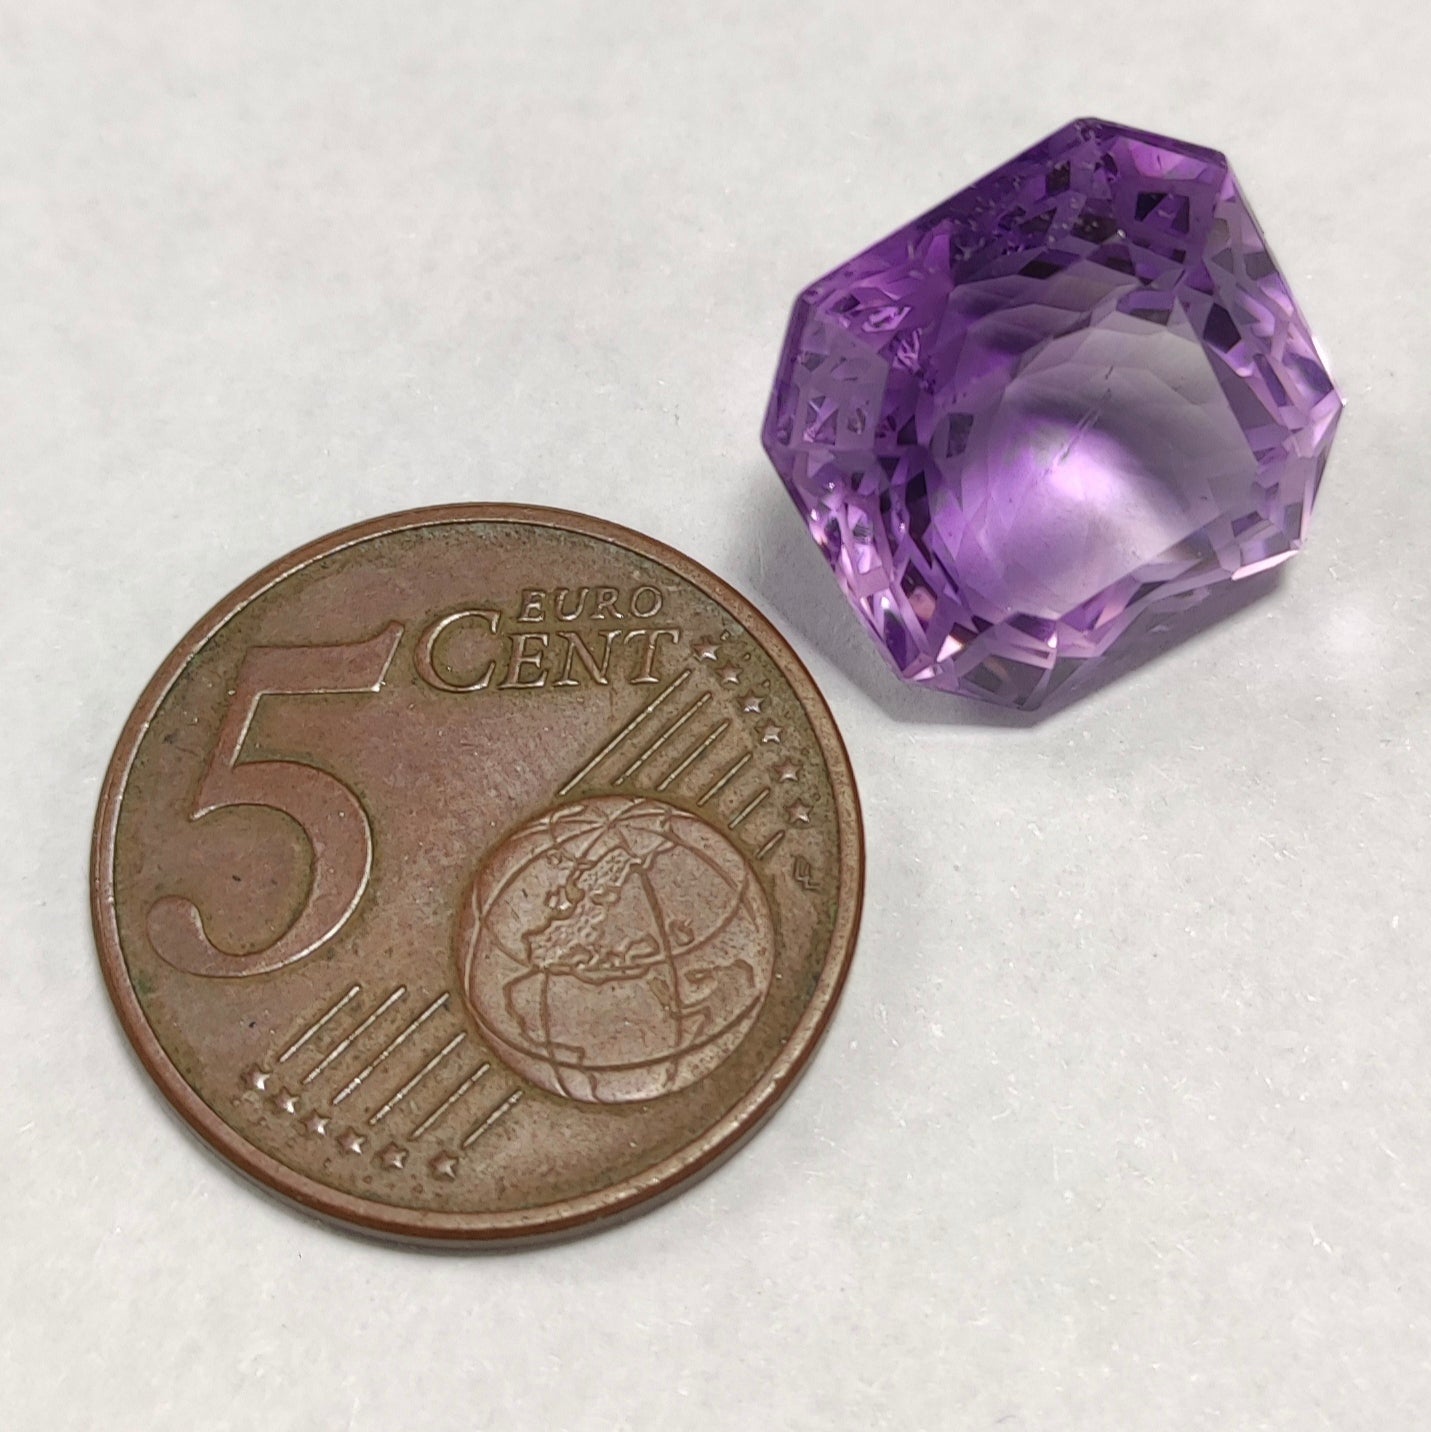 ARSAA GEMS AND MINERALSNatural fine quality beautiful 15 carats purple color clear faceted amethyst gem - Premium  from ARSAA GEMS AND MINERALS - Just $30! Shop now at ARSAA GEMS AND MINERALS